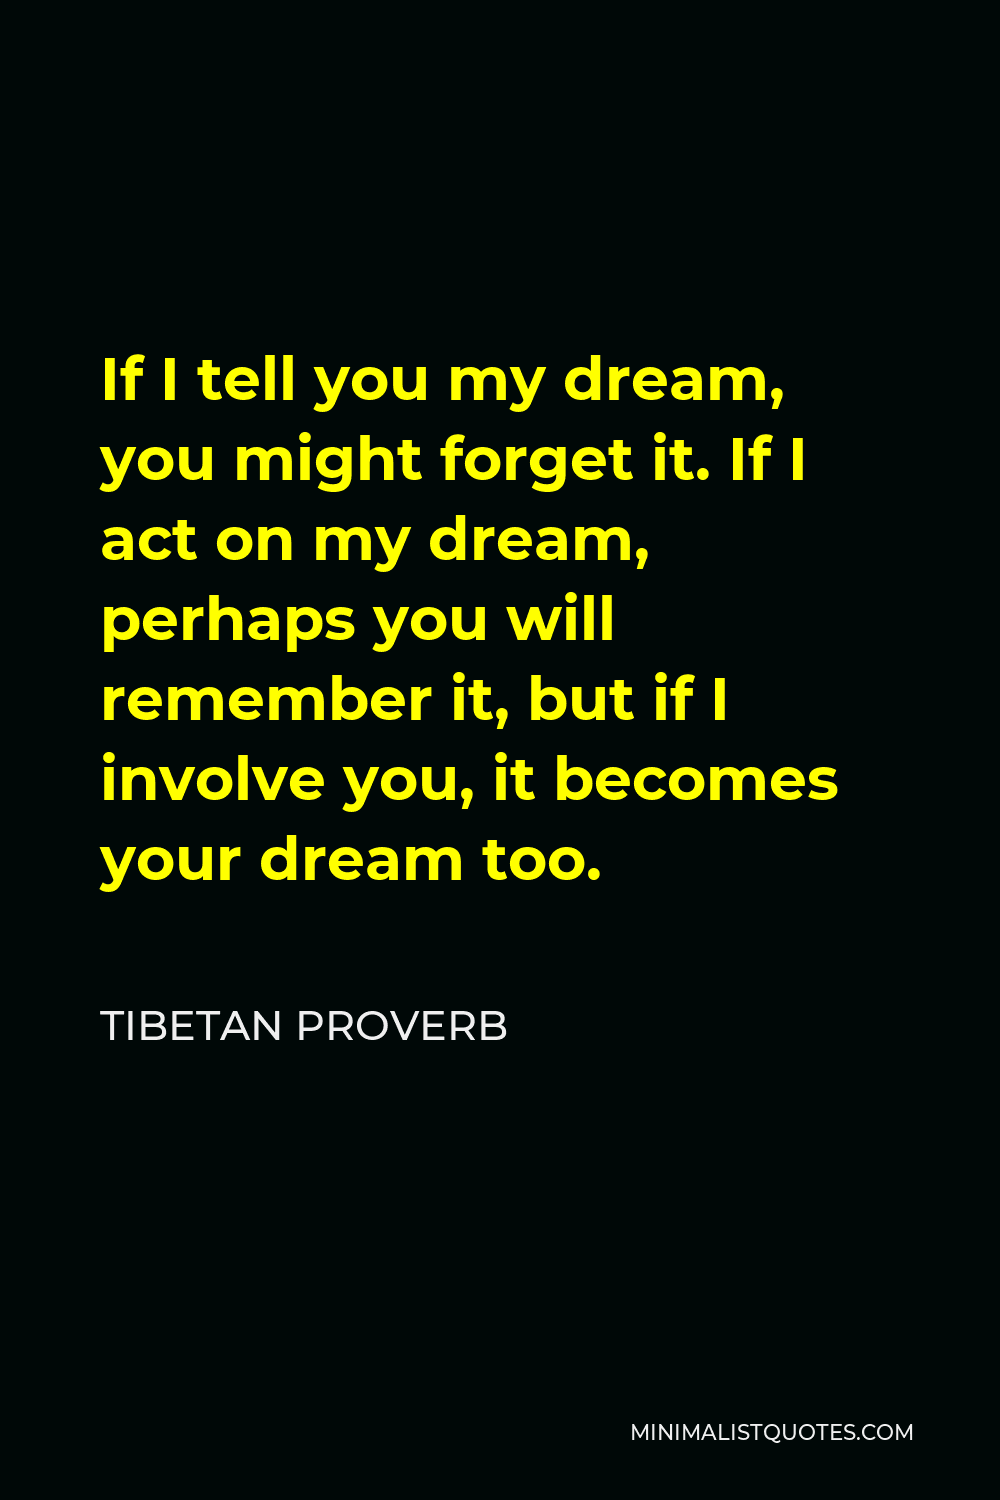 Tibetan Proverb Quote - If I tell you my dream, you might forget it. If I act on my dream, perhaps you will remember it, but if I involve you, it becomes your dream too.